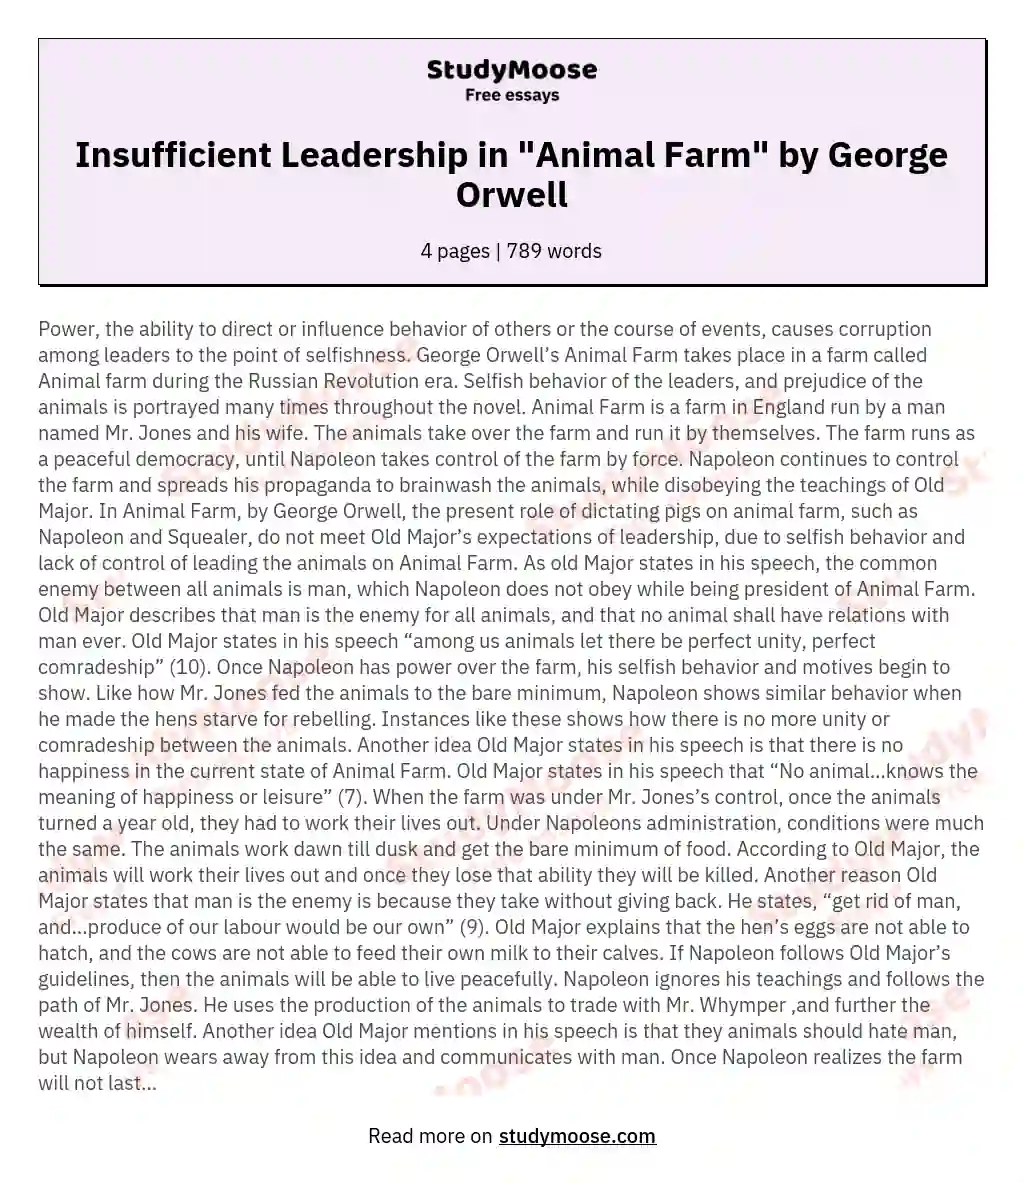 Insufficient Leadership in "Animal Farm" by George Orwell